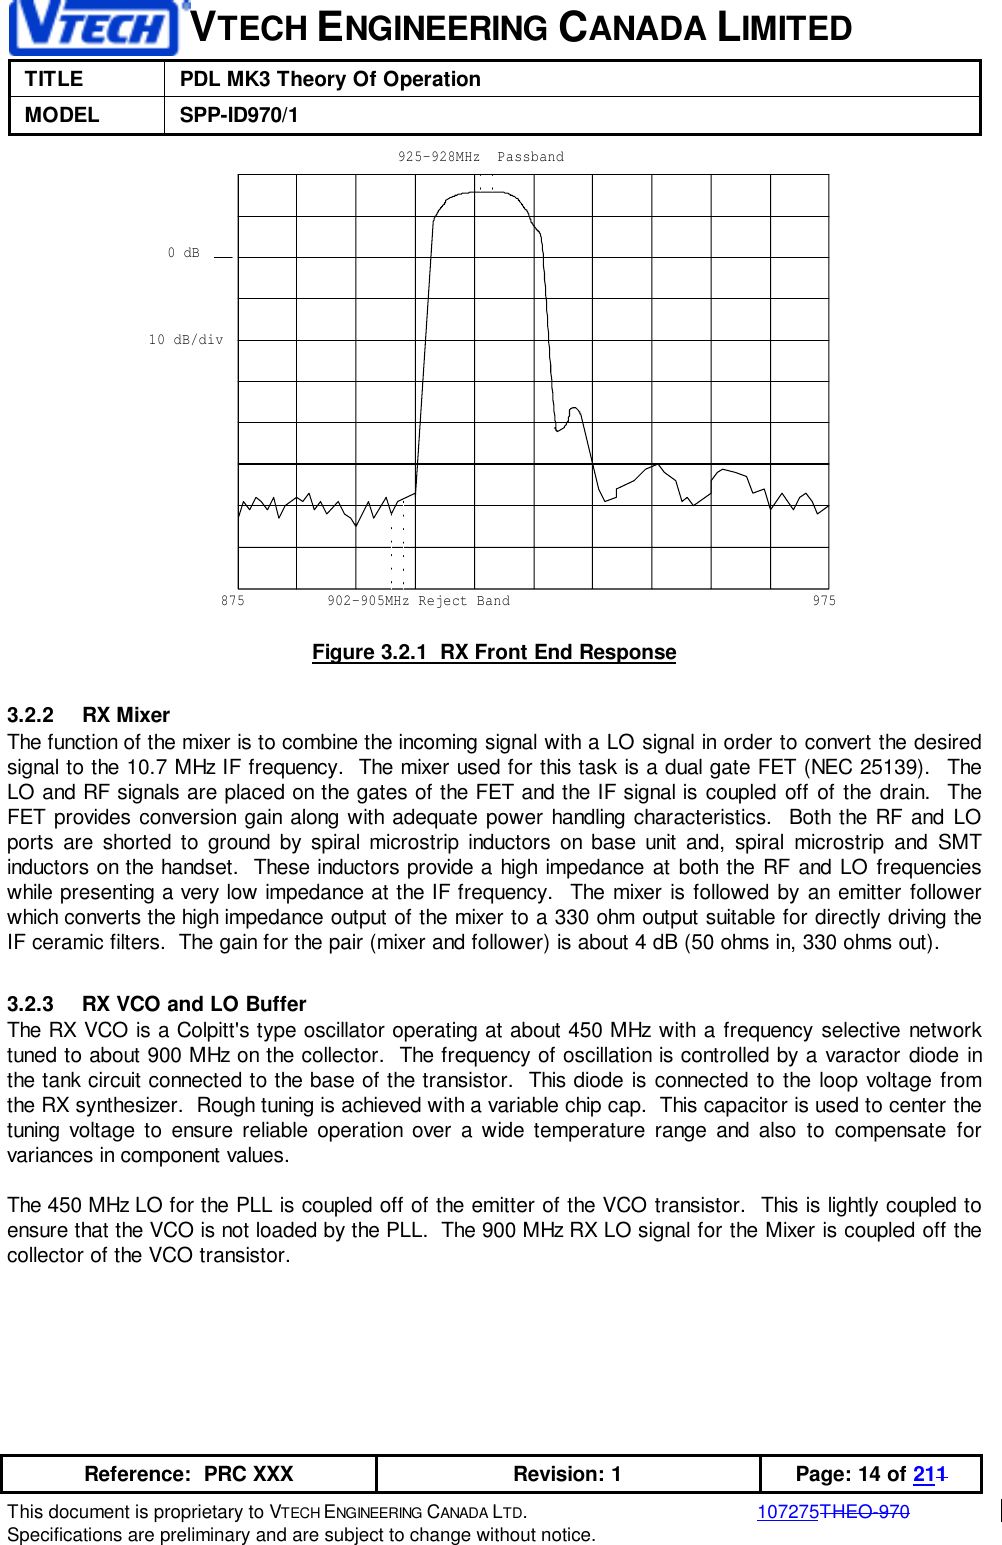 VTECH ENGINEERING CANADA LIMITEDTITLE PDL MK3 Theory Of OperationMODEL SPP-ID970/1Reference:  PRC XXX Revision: 1 Page: 14 of 211This document is proprietary to VTECH ENGINEERING CANADA LTD.107275THEO-970Specifications are preliminary and are subject to change without notice.0 dB10 dB/div875 975925-928MHz  Passband902-905MHz Reject BandFigure 3.2.1  RX Front End Response3.2.2 RX MixerThe function of the mixer is to combine the incoming signal with a LO signal in order to convert the desiredsignal to the 10.7 MHz IF frequency.  The mixer used for this task is a dual gate FET (NEC 25139).  TheLO and RF signals are placed on the gates of the FET and the IF signal is coupled off of the drain.  TheFET provides conversion gain along with adequate power handling characteristics.  Both the RF and LOports are shorted to ground by spiral microstrip inductors on base unit and, spiral microstrip and SMTinductors on the handset.  These inductors provide a high impedance at both the RF and LO frequencieswhile presenting a very low impedance at the IF frequency.  The mixer is followed by an emitter followerwhich converts the high impedance output of the mixer to a 330 ohm output suitable for directly driving theIF ceramic filters.  The gain for the pair (mixer and follower) is about 4 dB (50 ohms in, 330 ohms out).3.2.3  RX VCO and LO BufferThe RX VCO is a Colpitt&apos;s type oscillator operating at about 450 MHz with a frequency selective networktuned to about 900 MHz on the collector.  The frequency of oscillation is controlled by a varactor diode inthe tank circuit connected to the base of the transistor.  This diode is connected to the loop voltage fromthe RX synthesizer.  Rough tuning is achieved with a variable chip cap.  This capacitor is used to center thetuning voltage to ensure reliable operation over a wide temperature range and also to compensate forvariances in component values.The 450 MHz LO for the PLL is coupled off of the emitter of the VCO transistor.  This is lightly coupled toensure that the VCO is not loaded by the PLL.  The 900 MHz RX LO signal for the Mixer is coupled off thecollector of the VCO transistor.